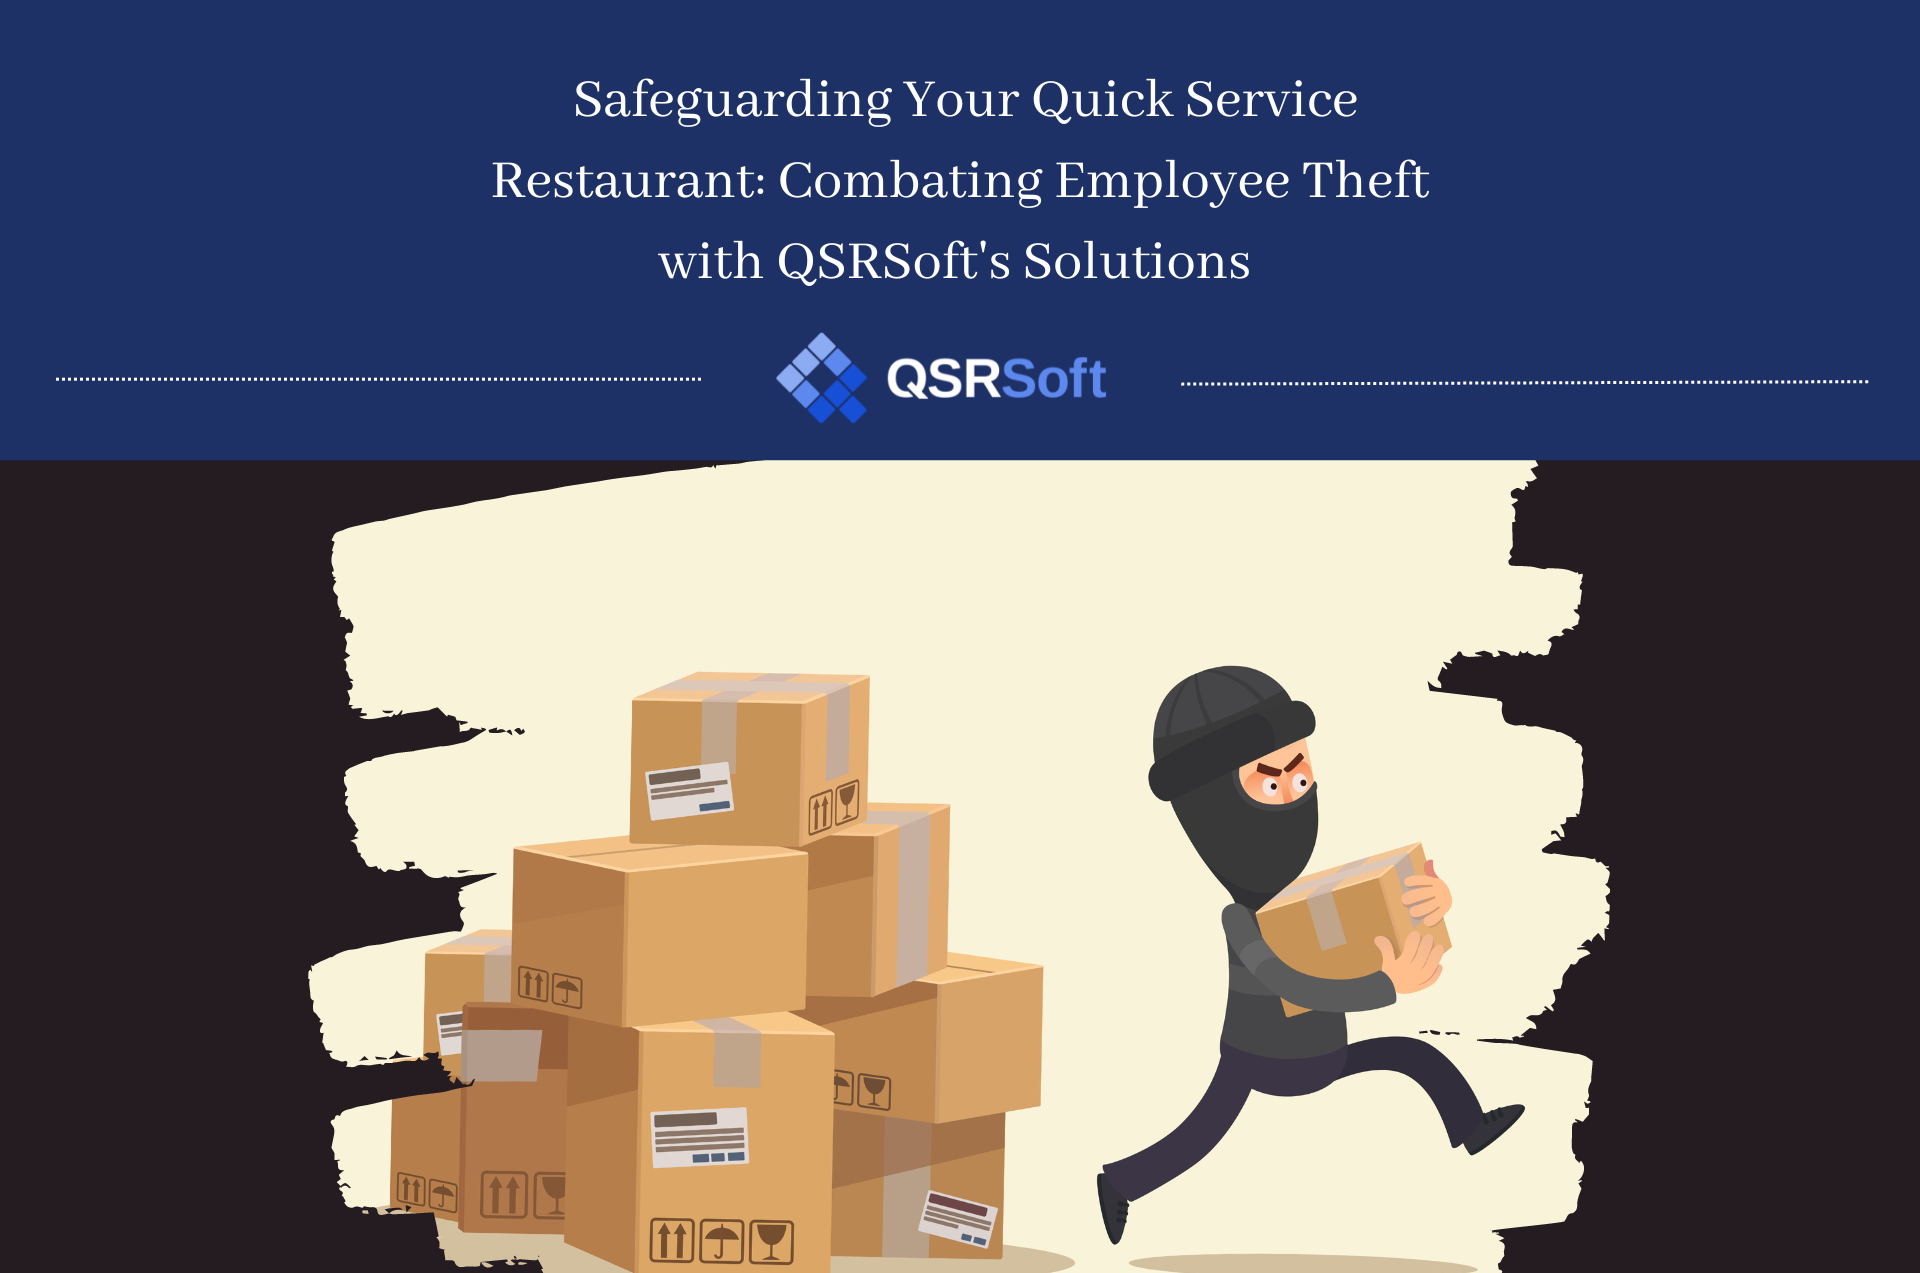 Safeguarding your Quick Service Restaurant - Combating Employee Theft with QSRSoft's Solutions